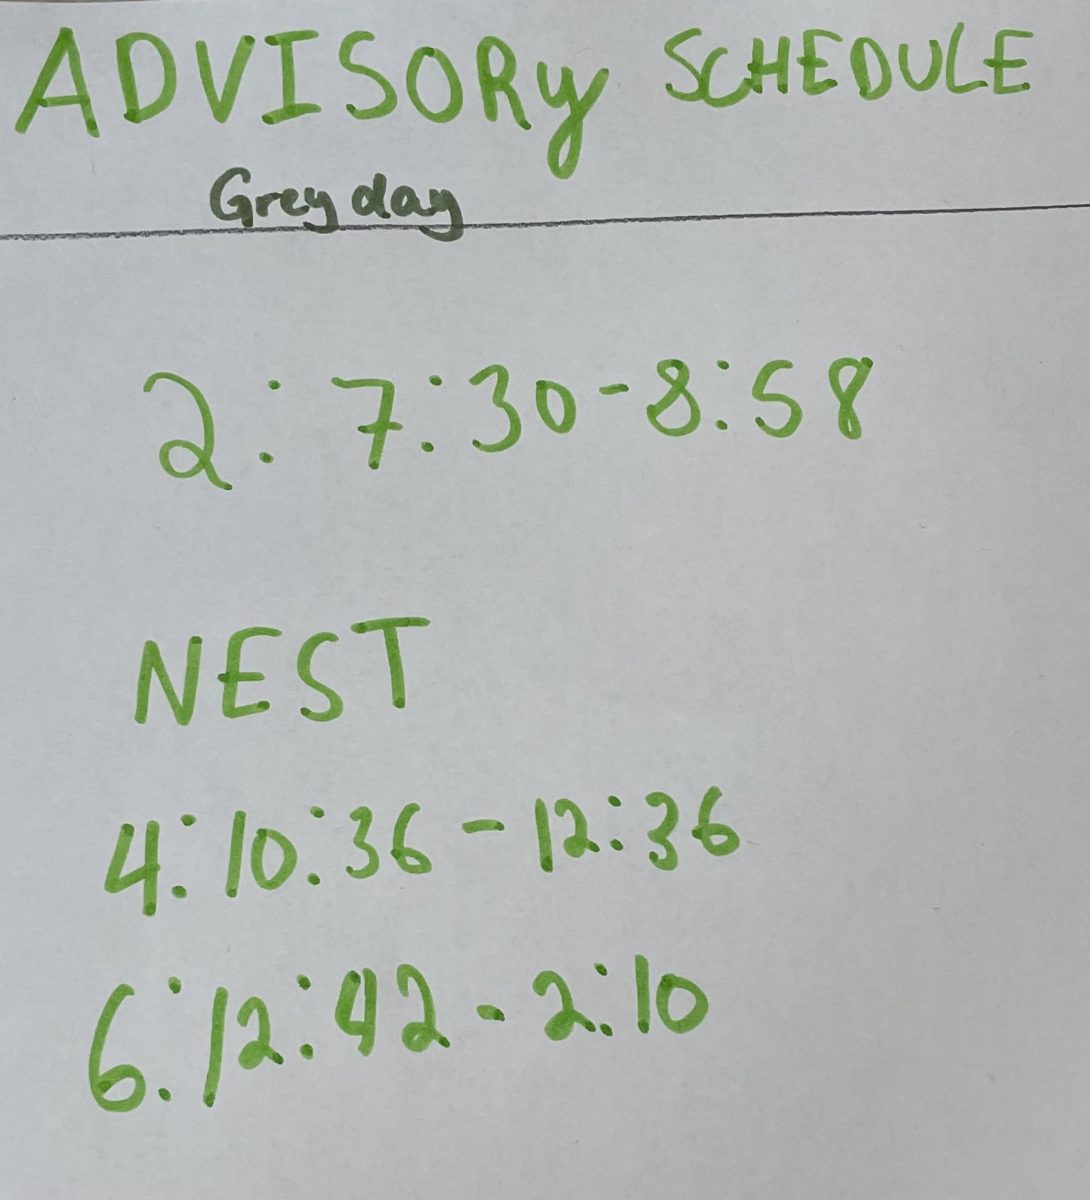 Student+Opinions+on+the+Advisory+Schedule